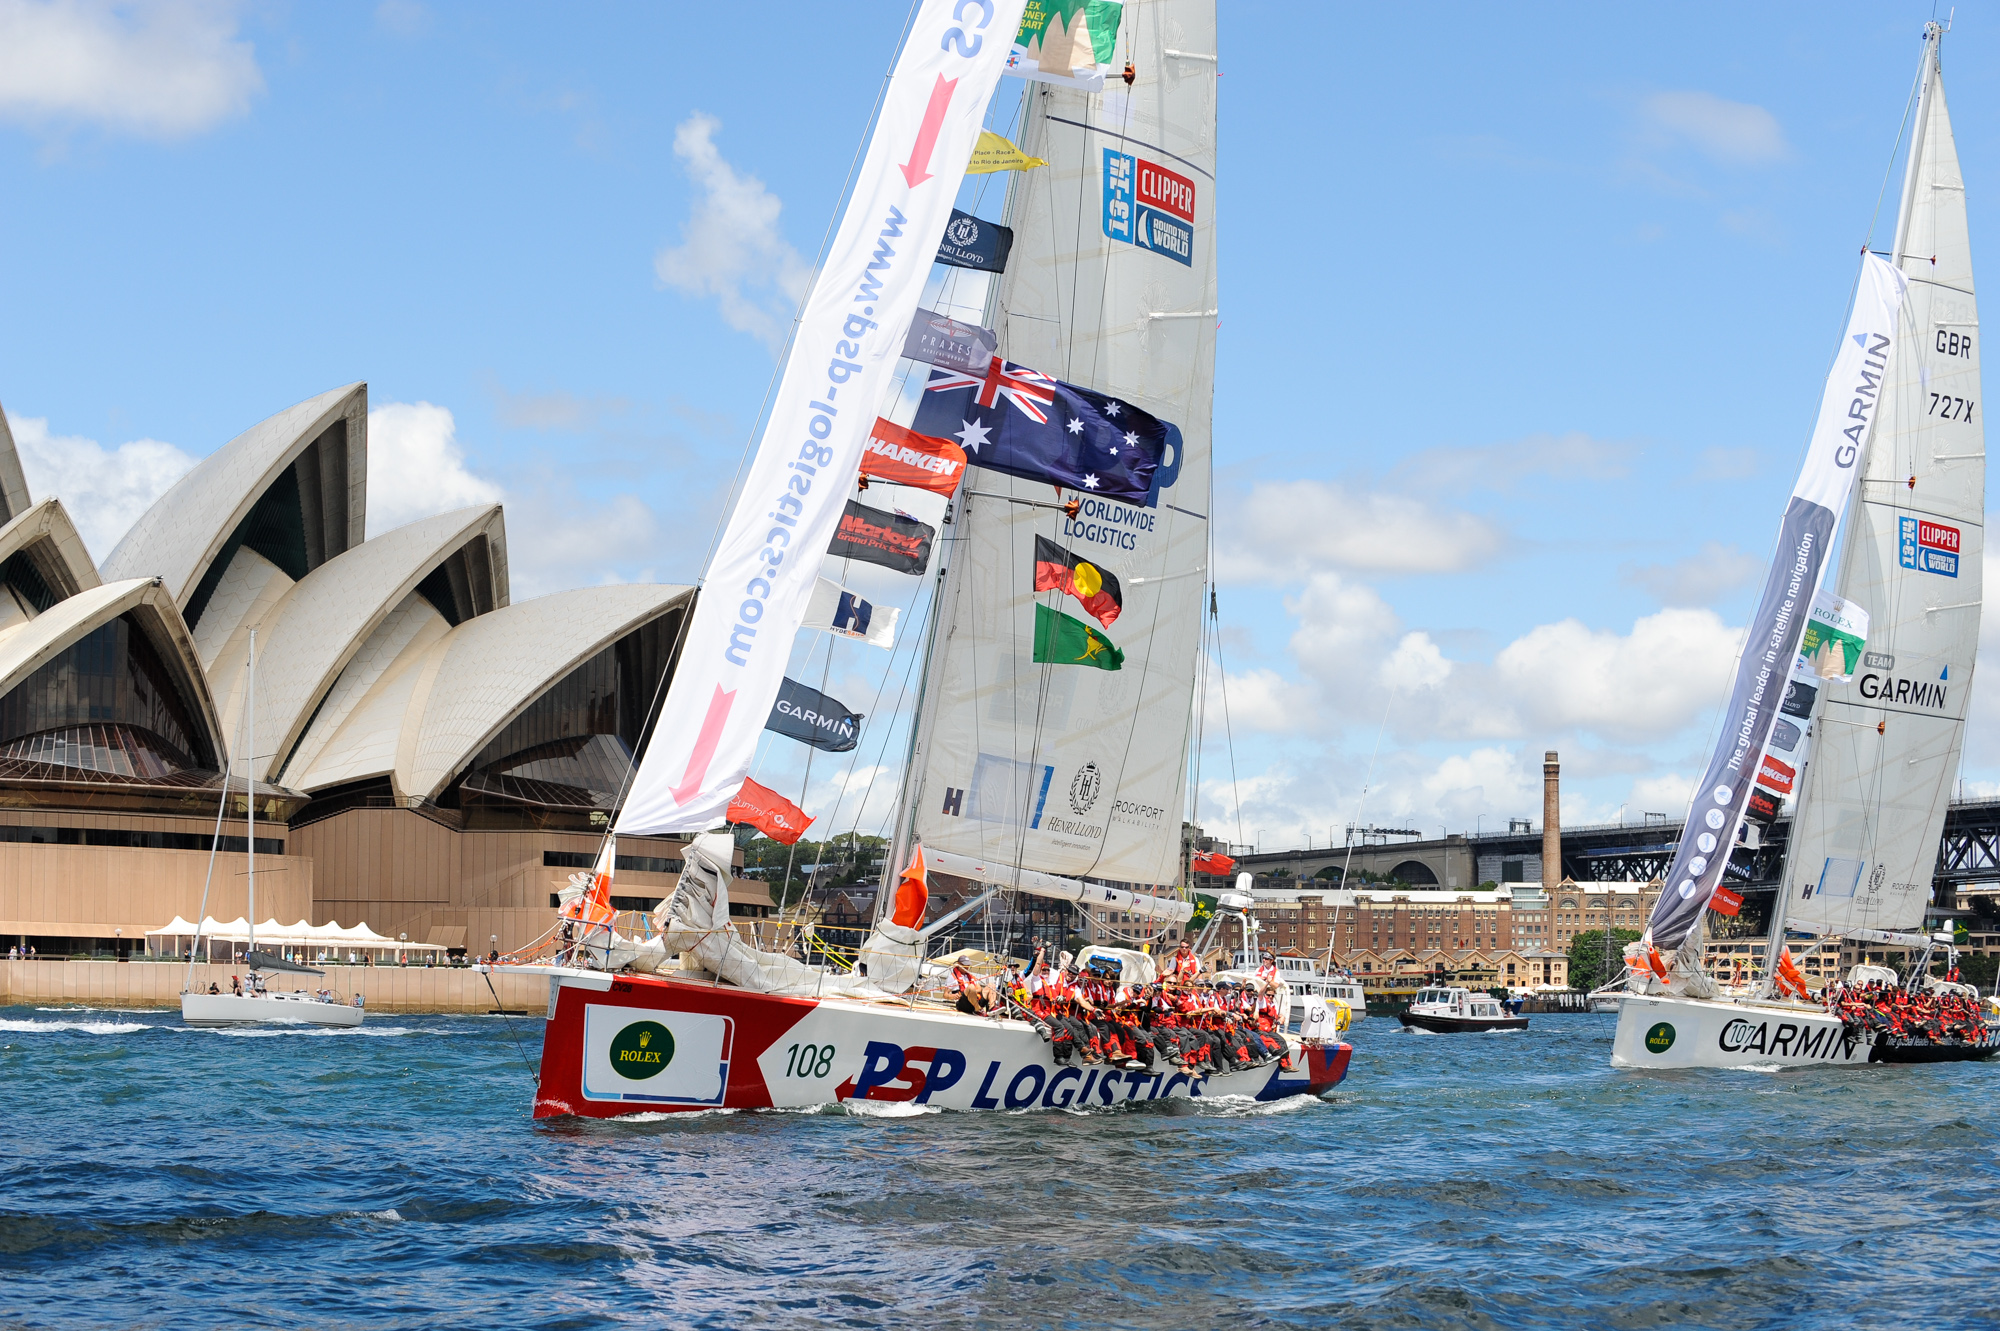 Australia Day marks first anniversary celebrations for Clipper Race in Sydney